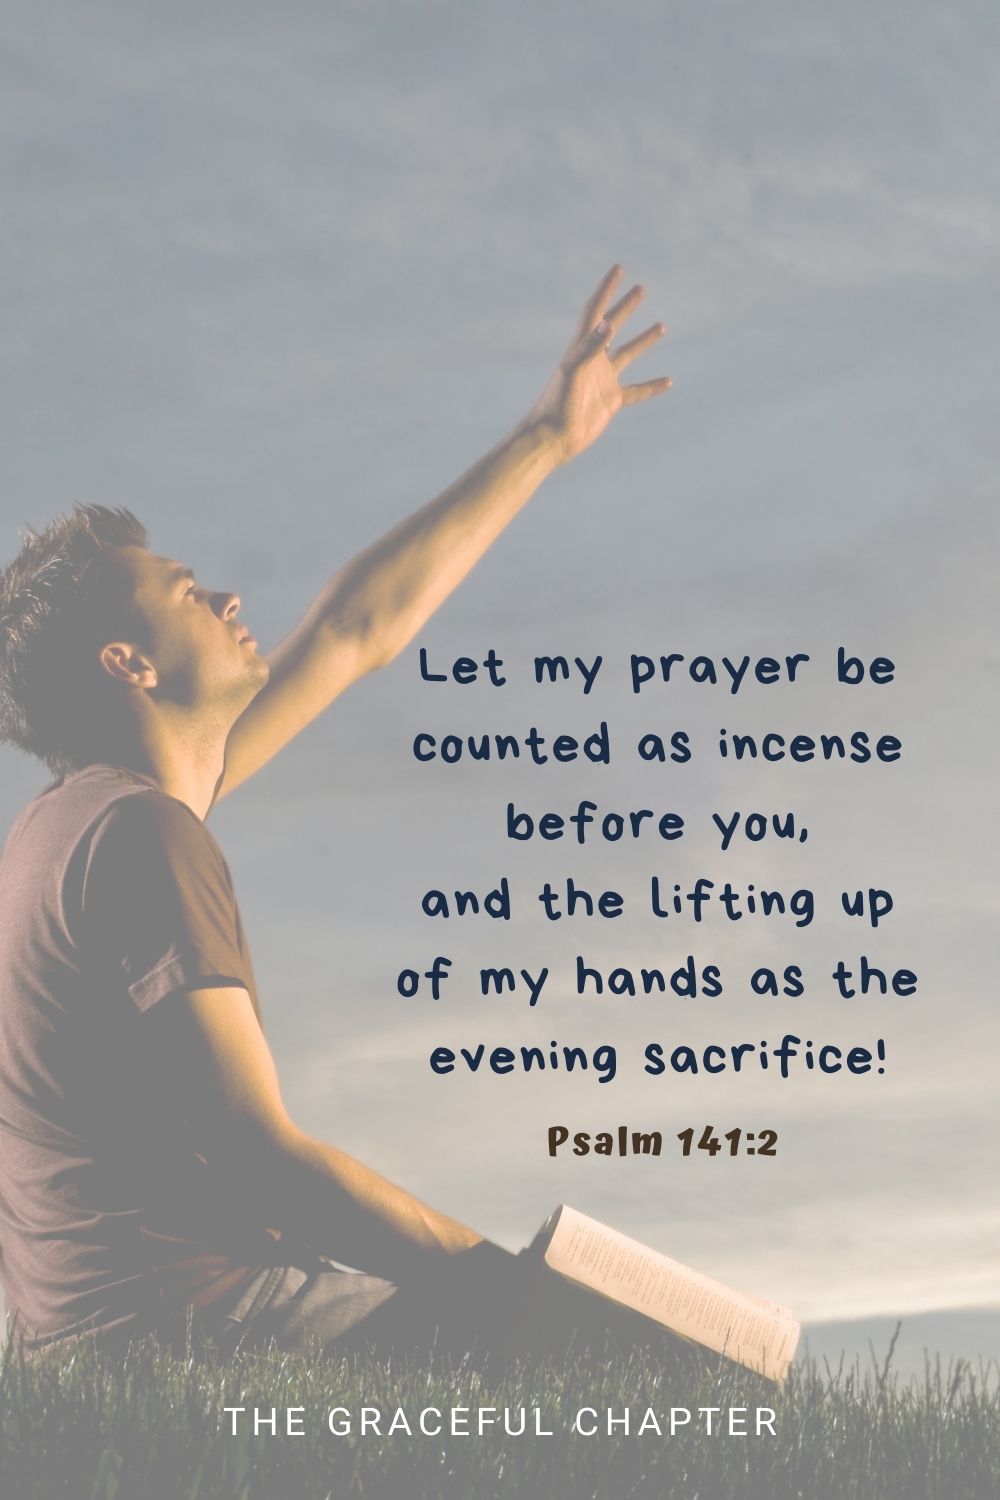 Let my prayer be counted as incense before you, and the lifting up of my hands as the evening sacrifice! Psalm 141:2